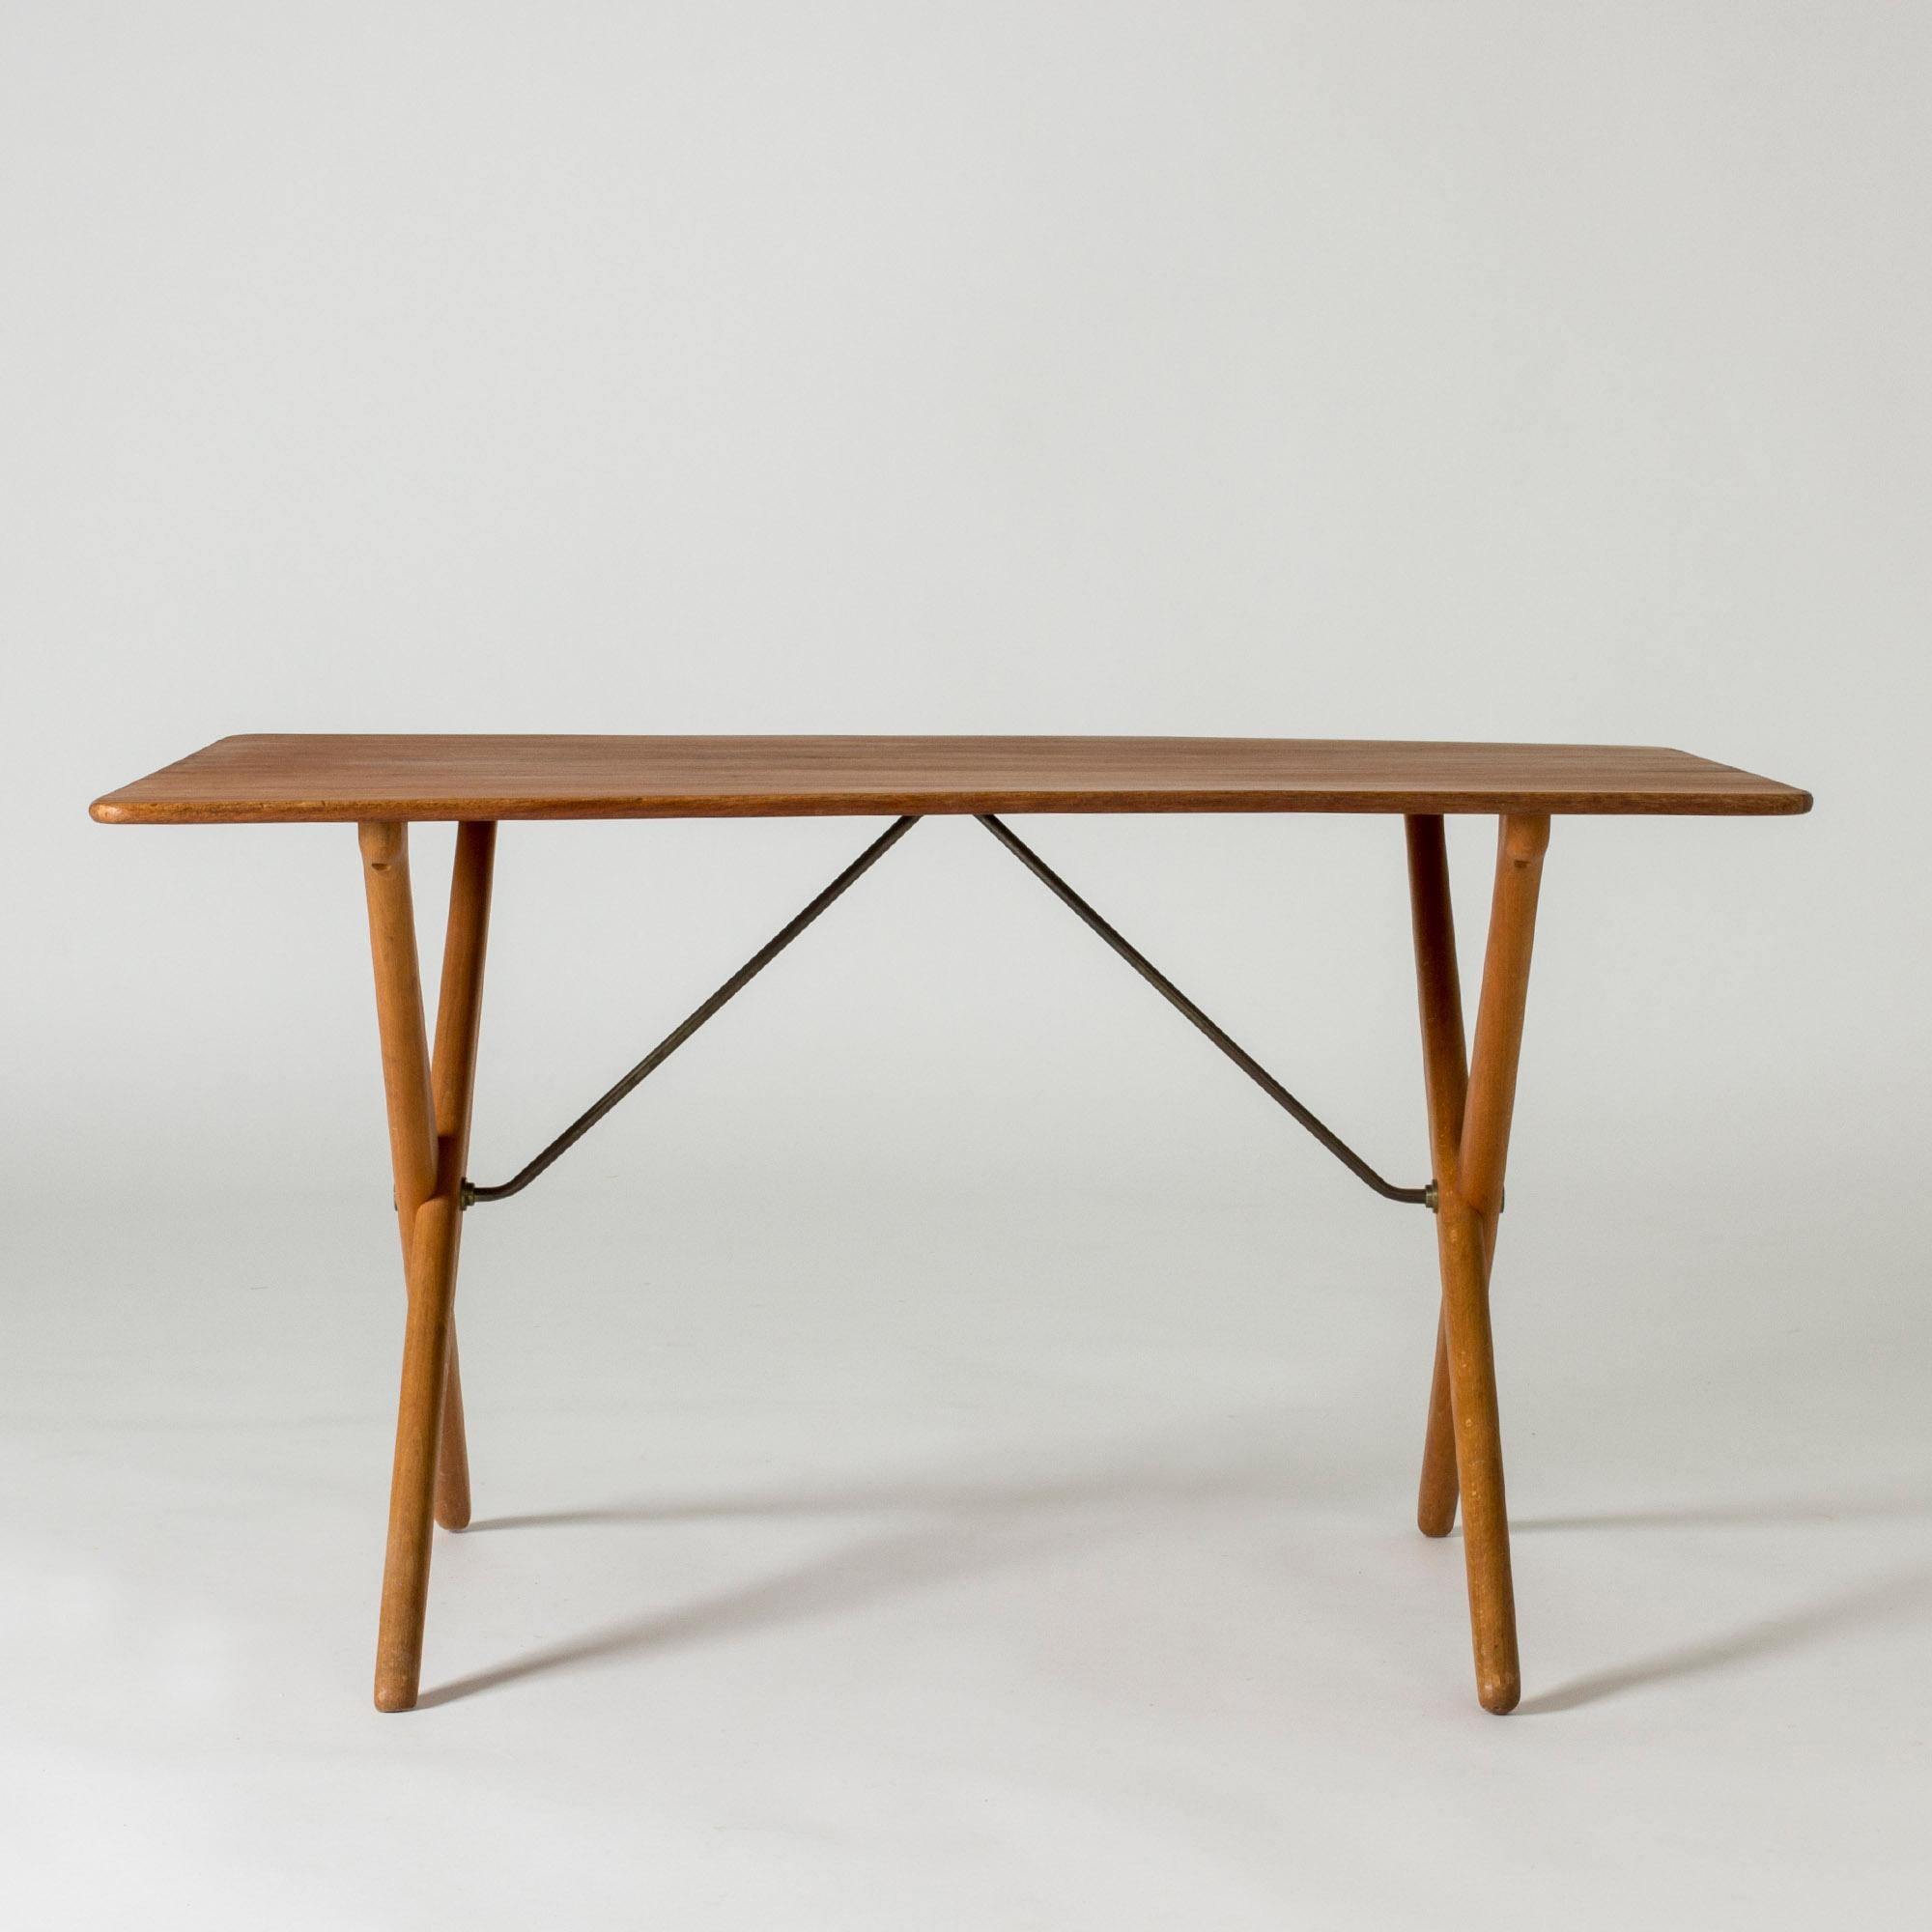 Coffee table “AT 308” by Hans J. Wegner, with a teak table top and oak legs. Elegantly sculpted, crossed legs, brass extenders.